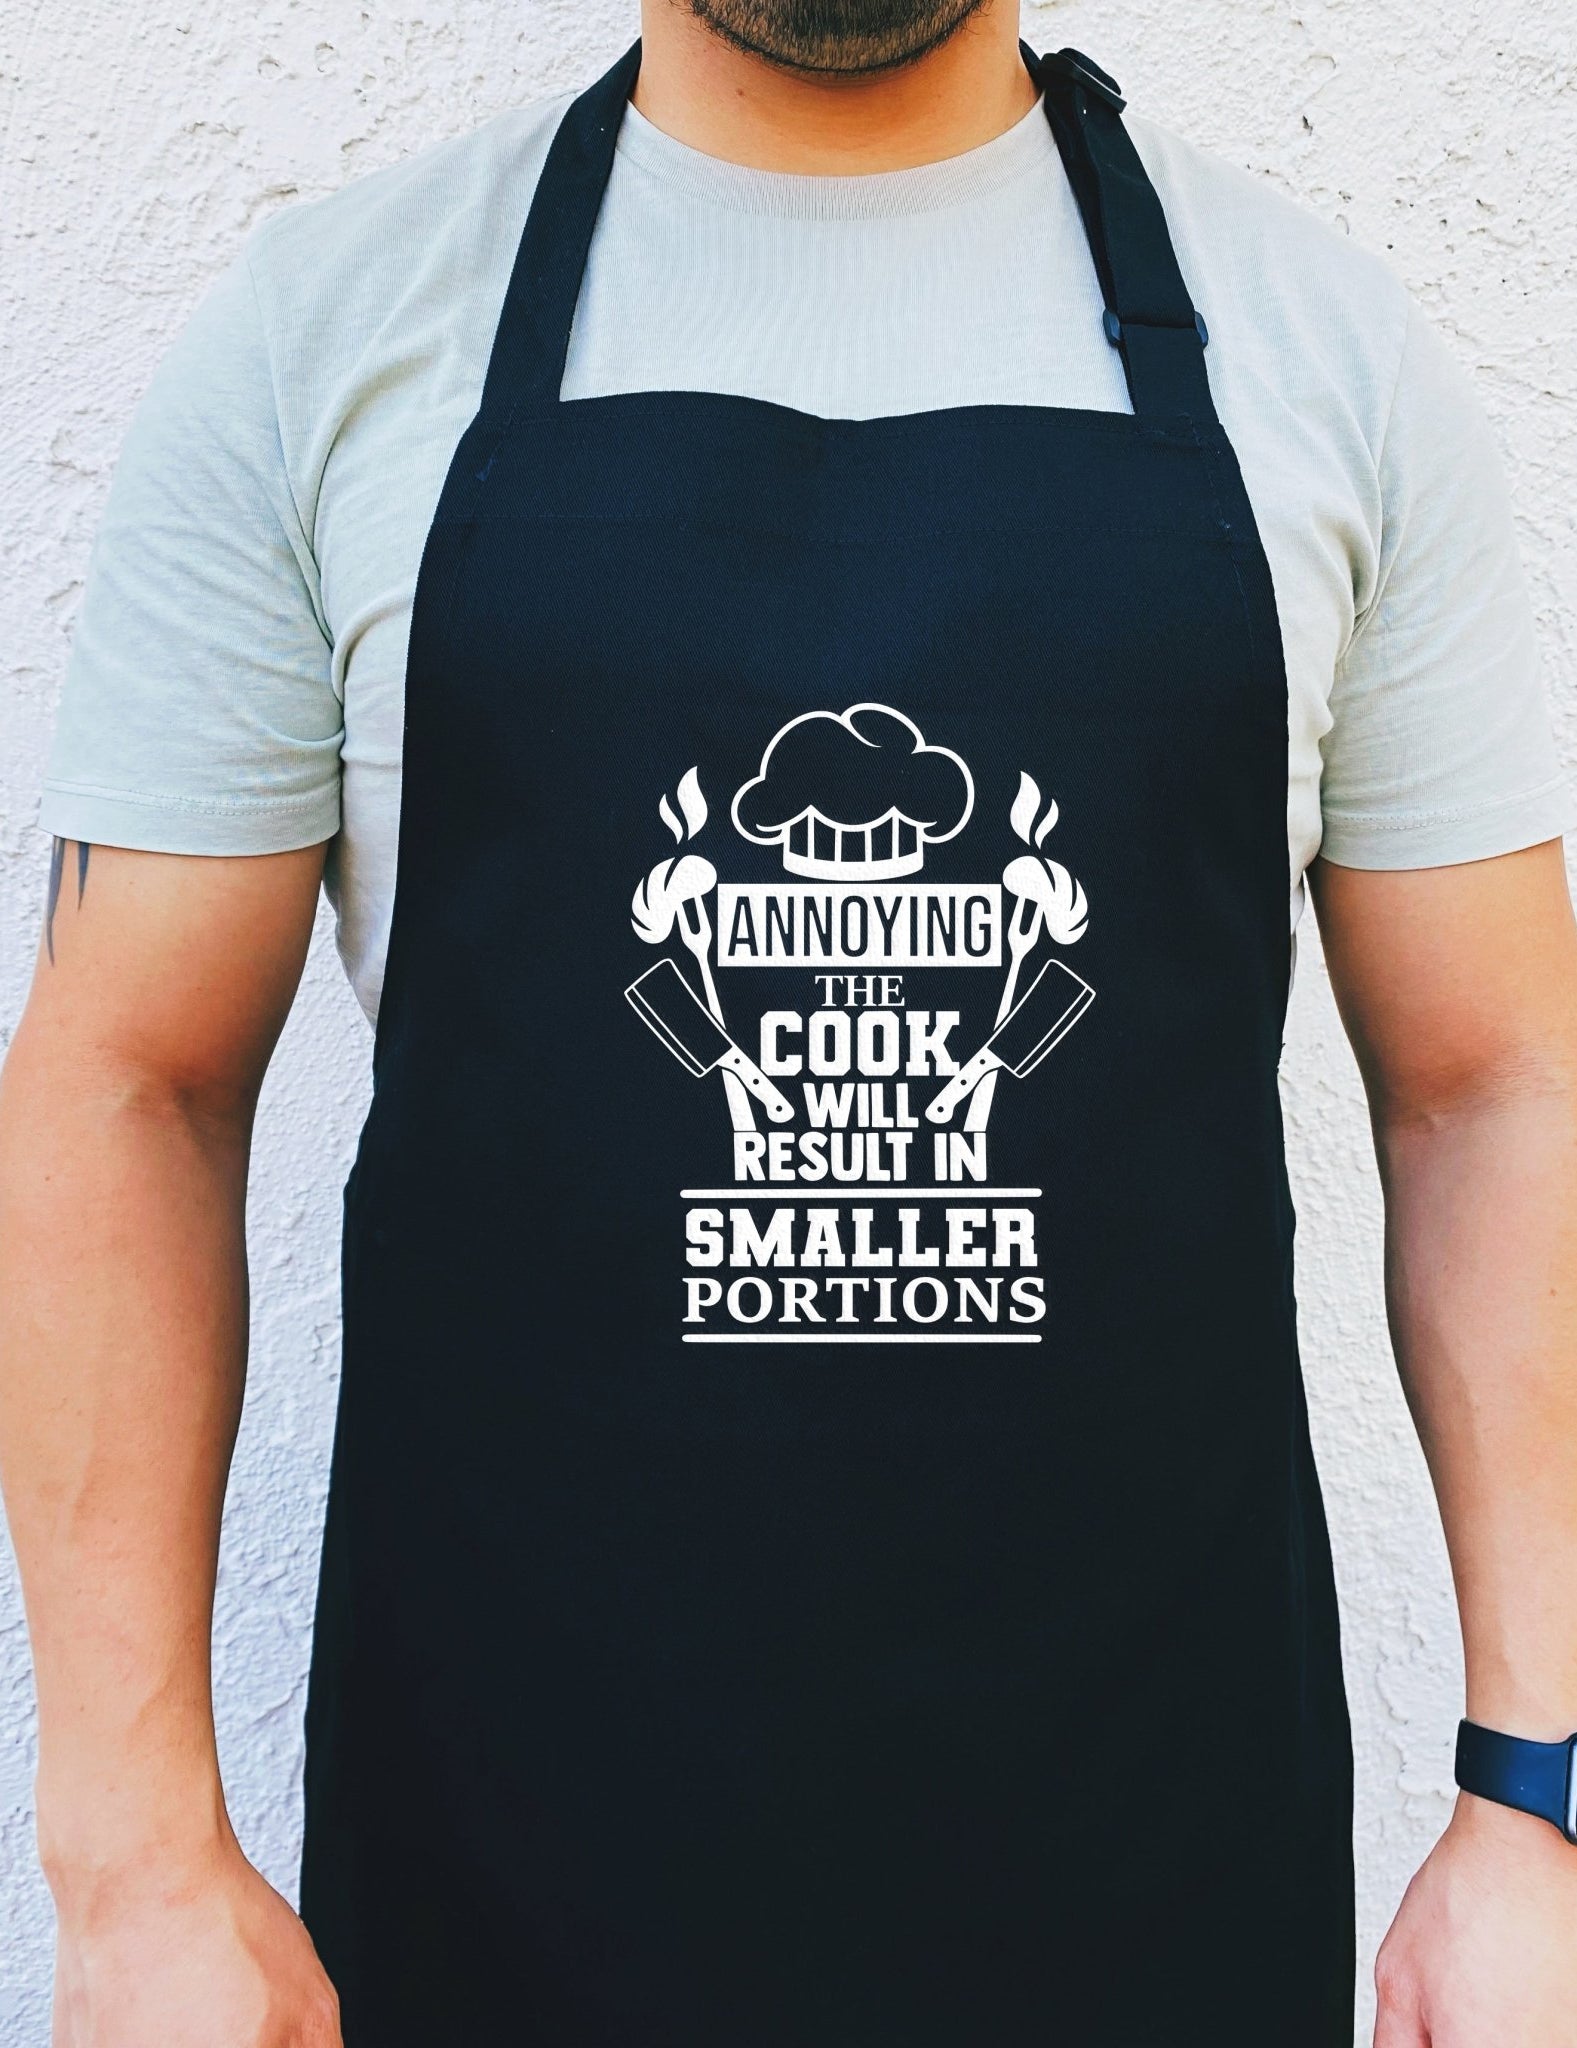 Annoying The Cook Will Result in Smaller Portions Apron - UntamedEgo LLC.